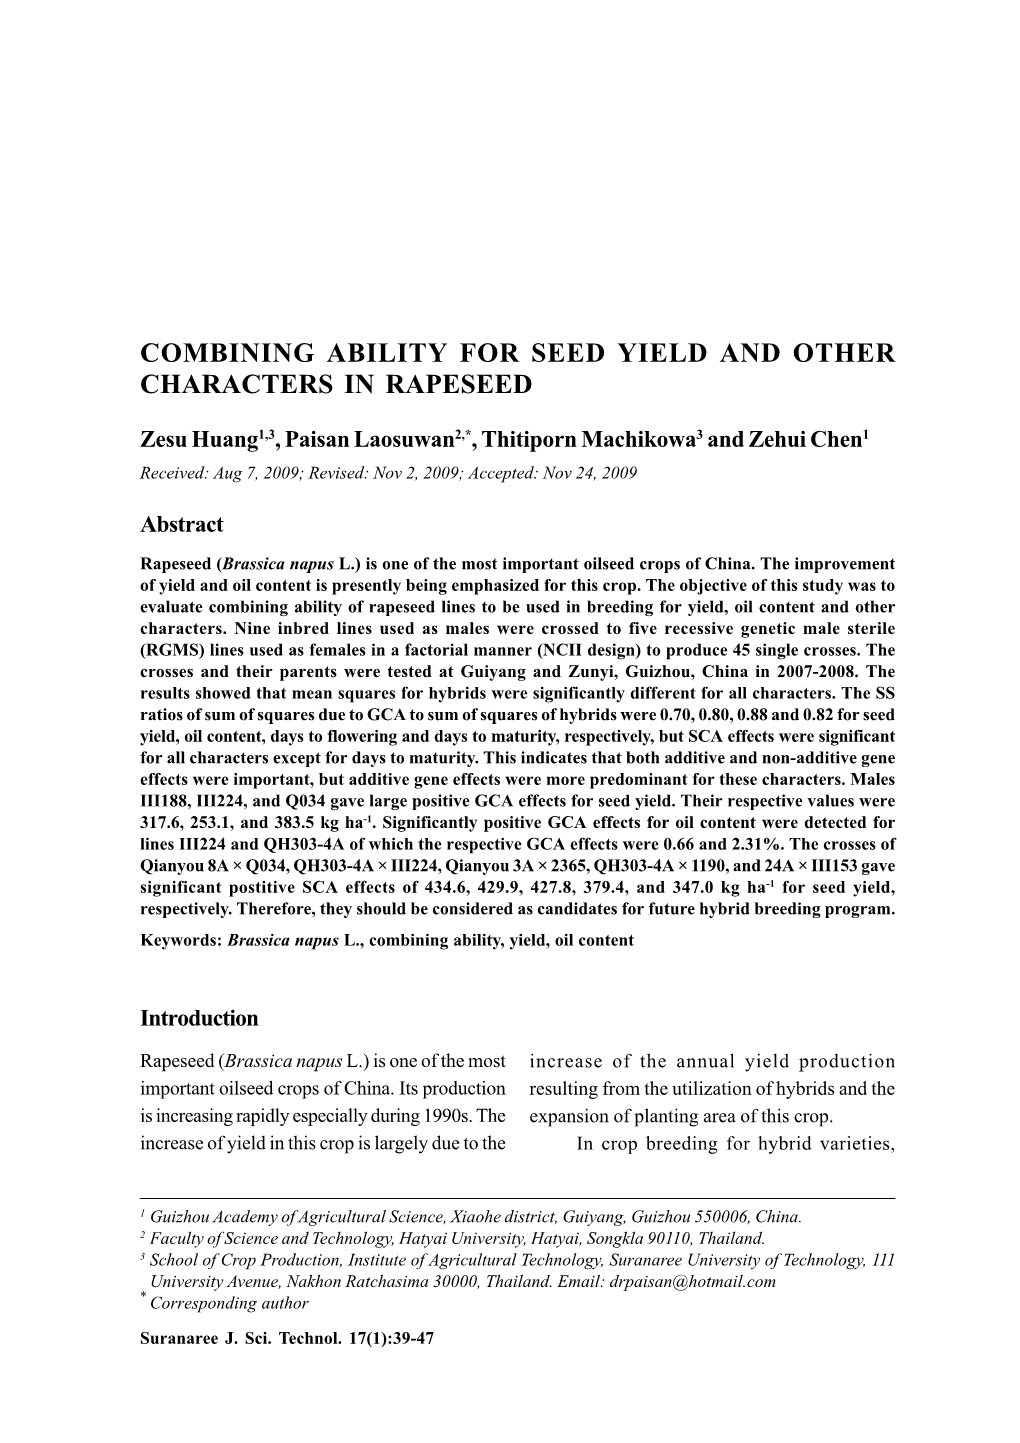 Combining Ability for Seed Yield and Other Characters in Rapeseed